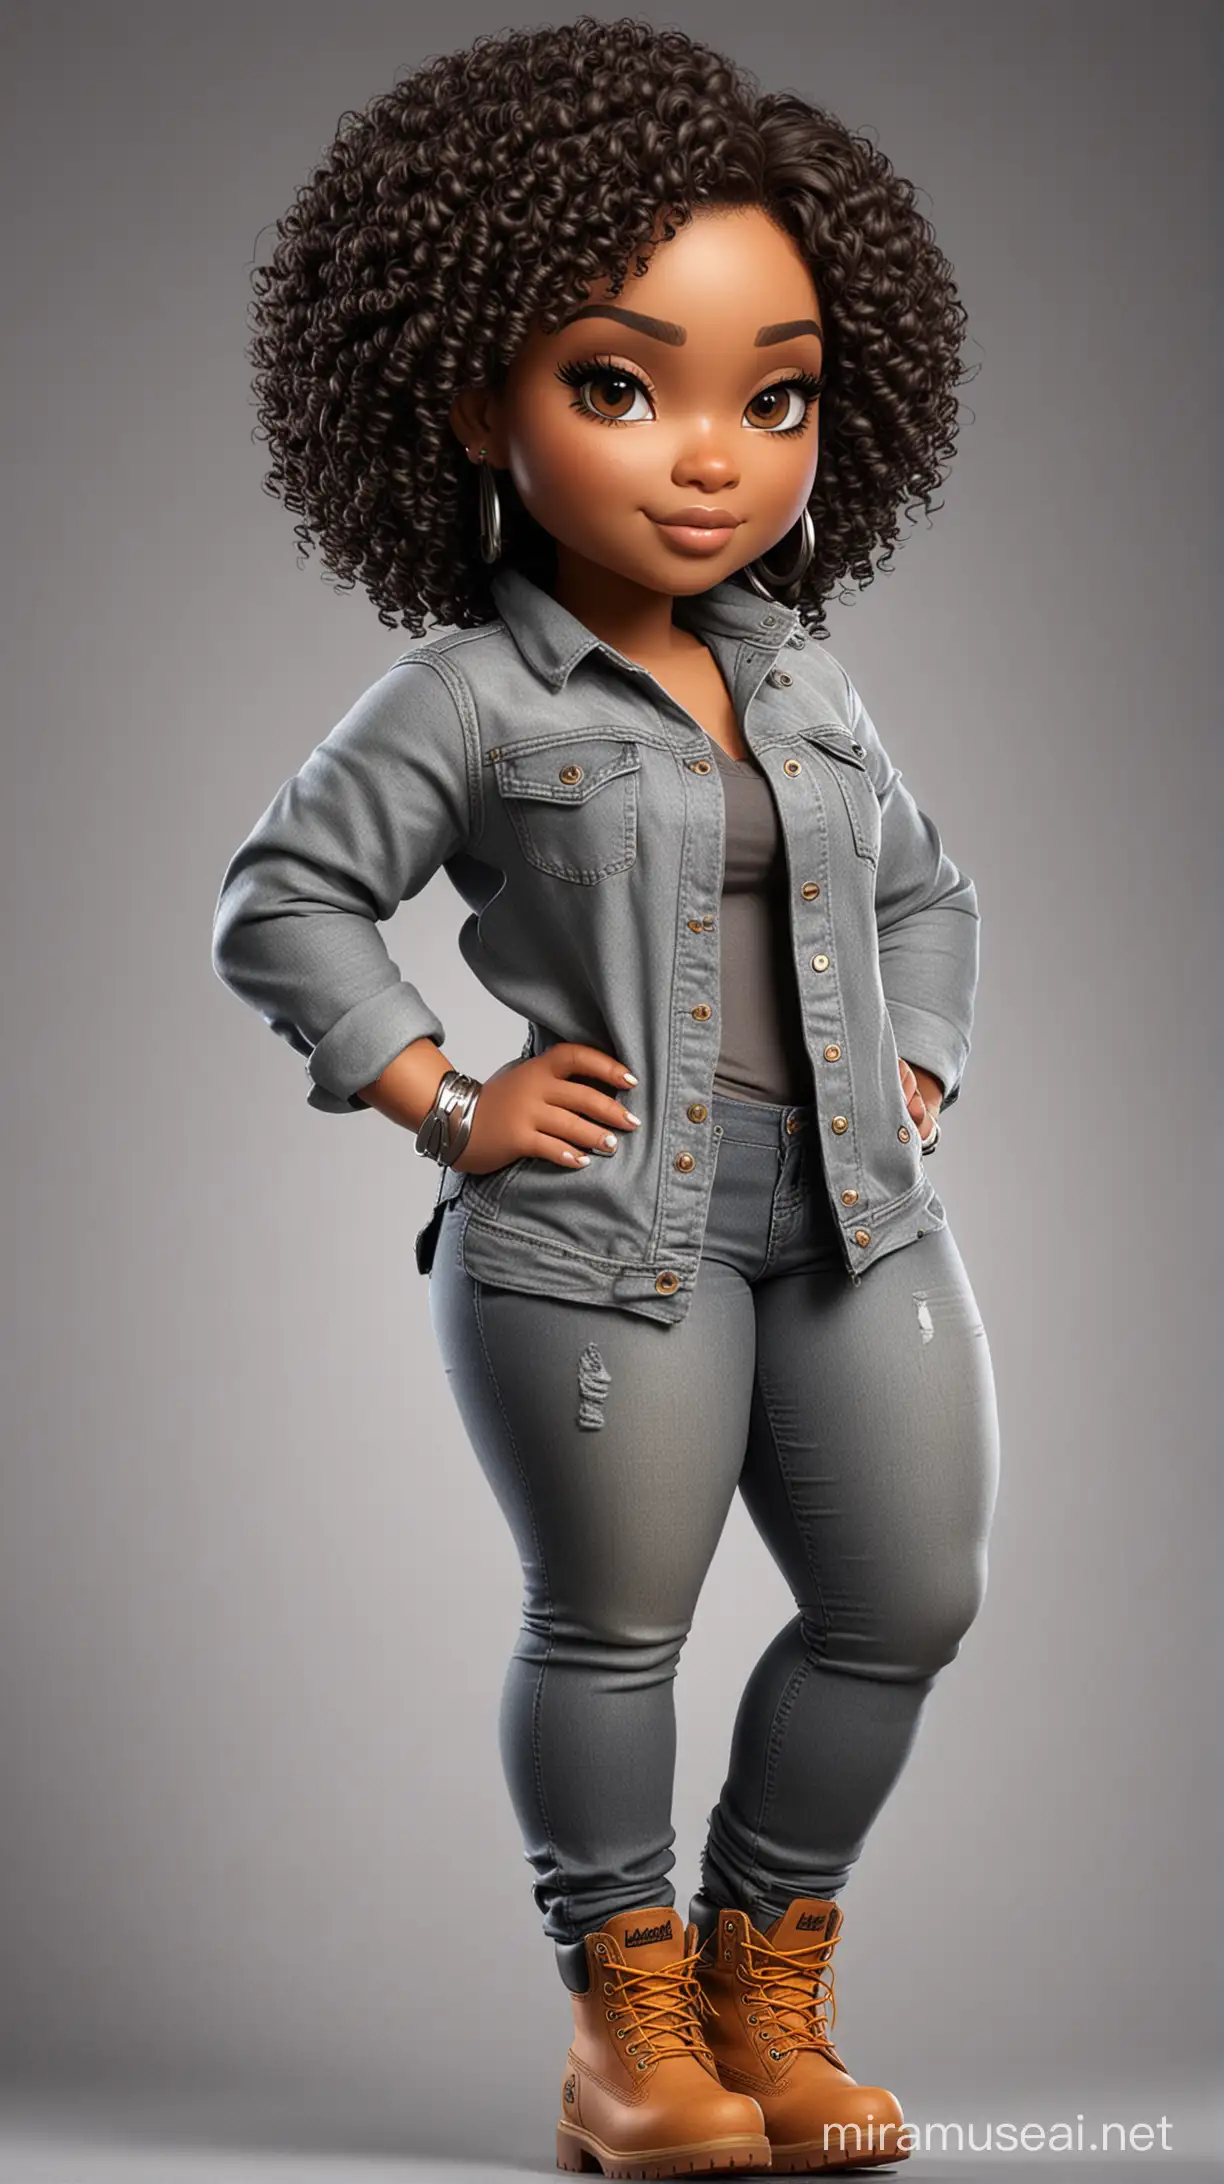 create a magna airbrush image of a plus size chibi dark skinned Black female wearing a grey jean outfit with timberland boots. Prominent make up with brown eyes. Highly detailed tight curly ombre afro